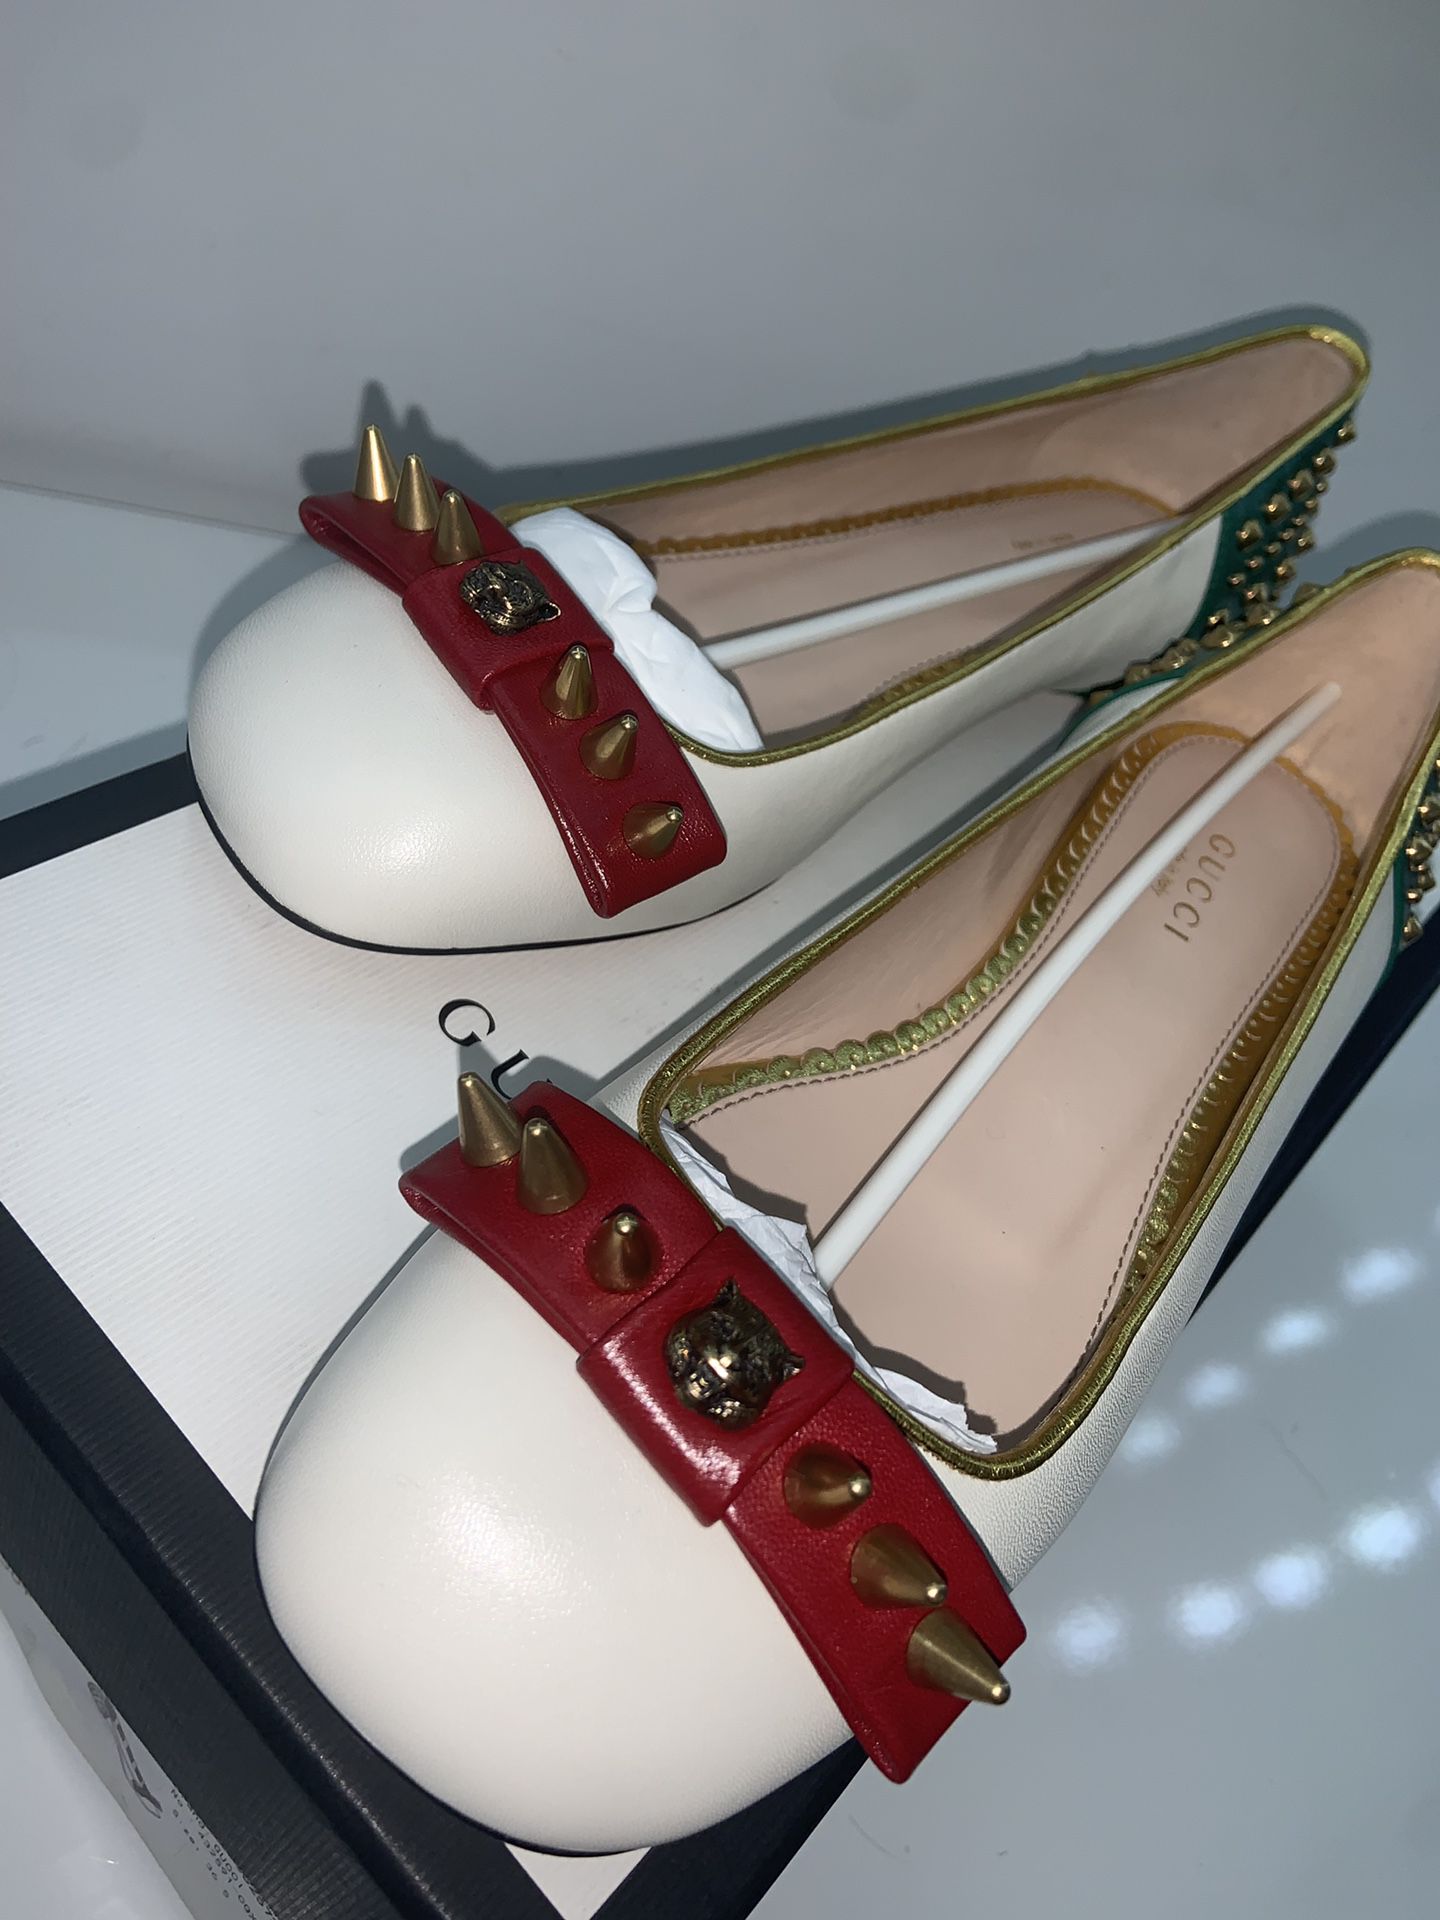 BRAND NEW GUCCI BALLET FLATS WITH BOX AND DUSTBAG